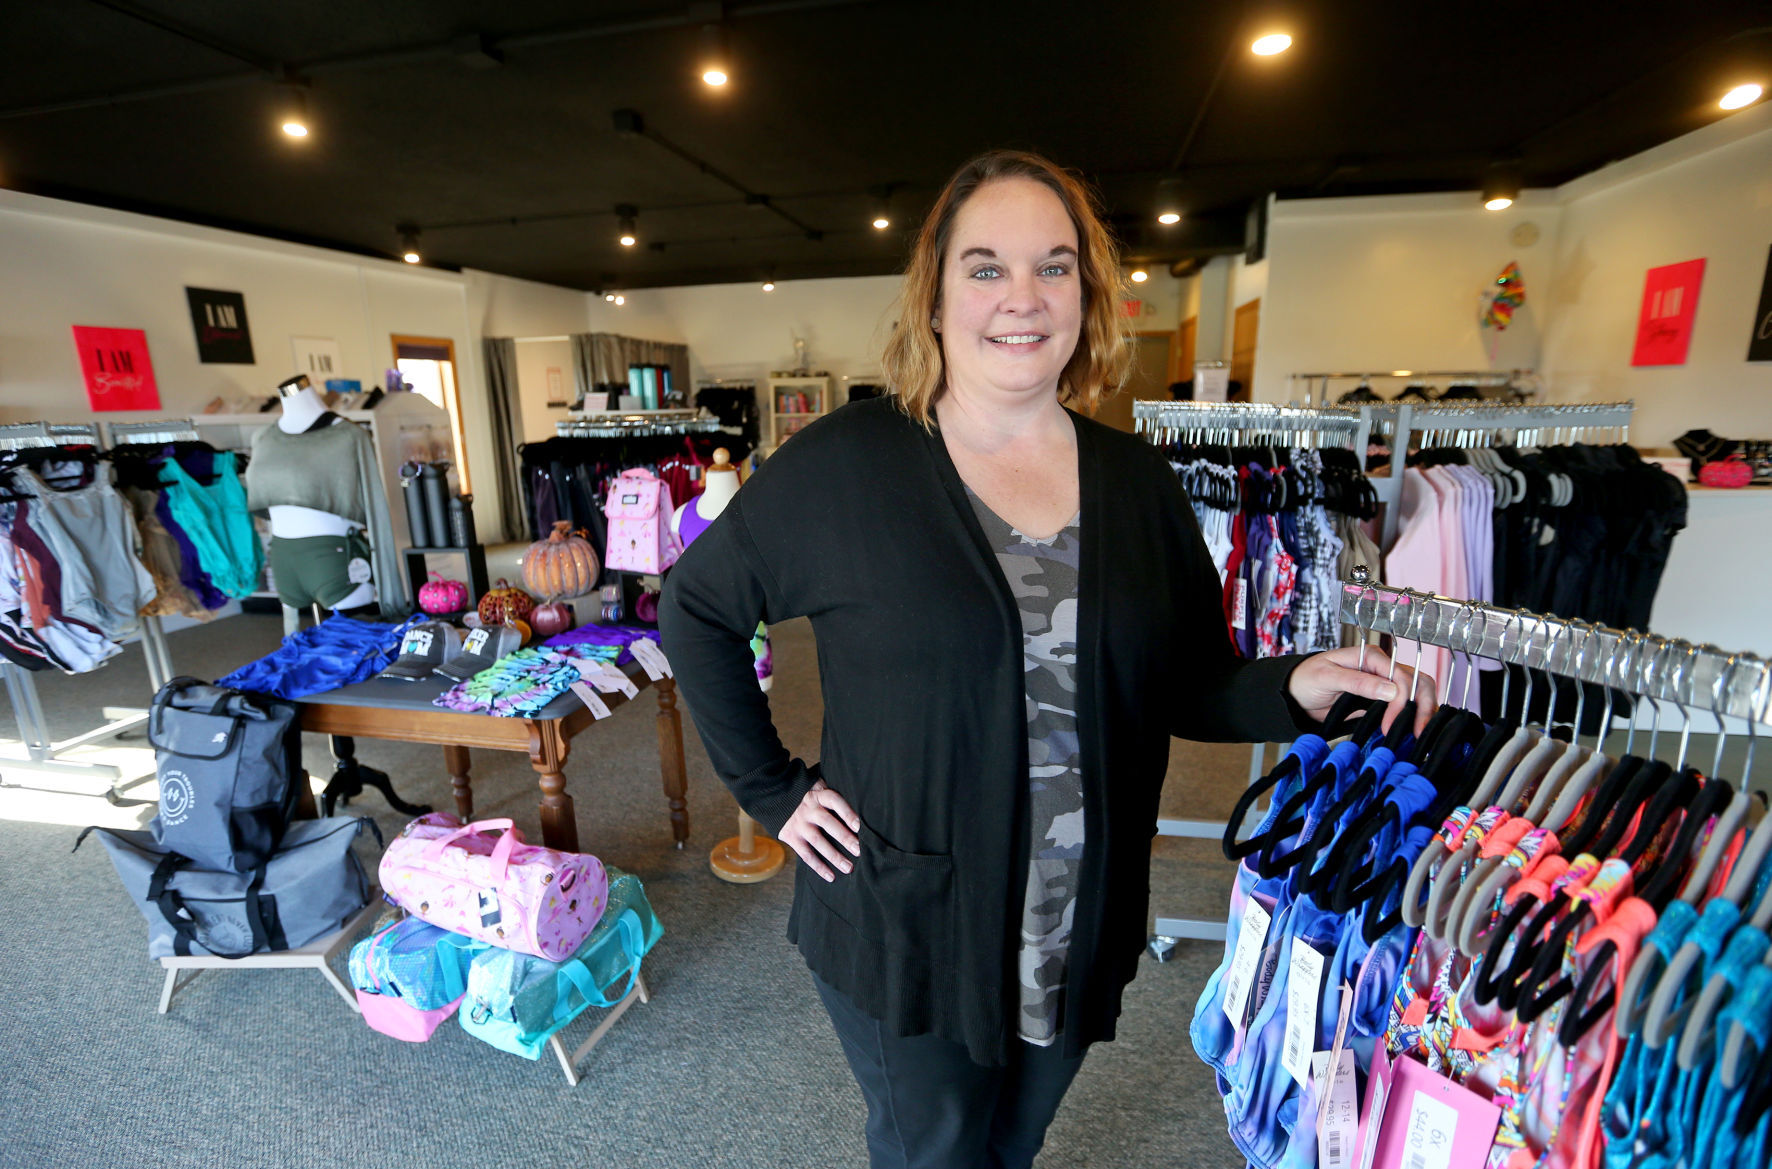 Owner Mandy Halbur recently opened Beauty In Motion Dancewear Boutique in Asbury, Iowa.    PHOTO CREDIT: JESSICA REILLY